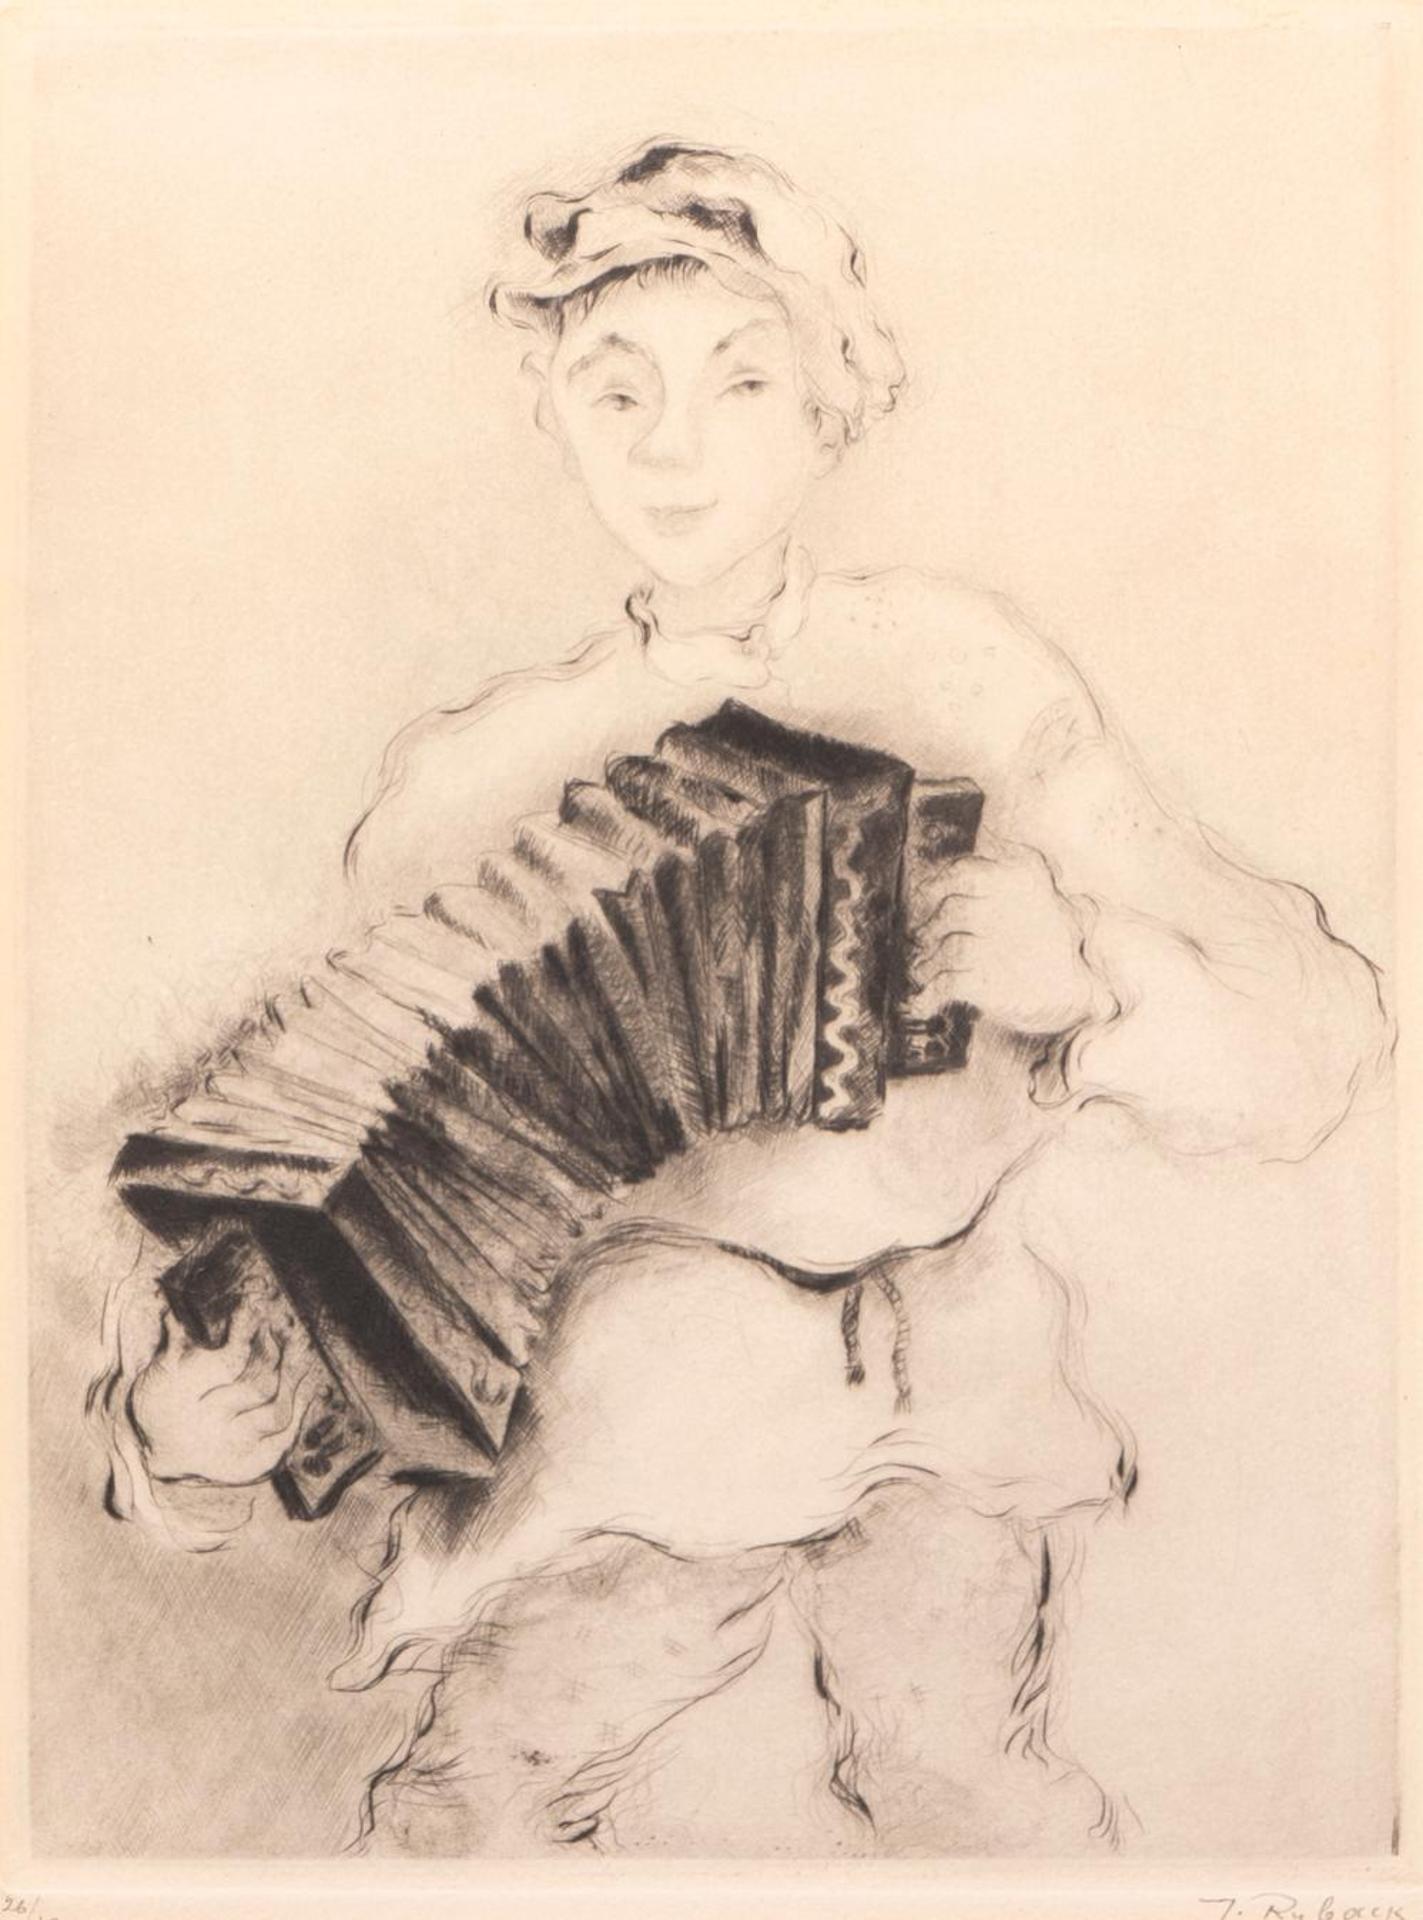 Issacher Ber Ryback (1897-1935) - The Accordion Player